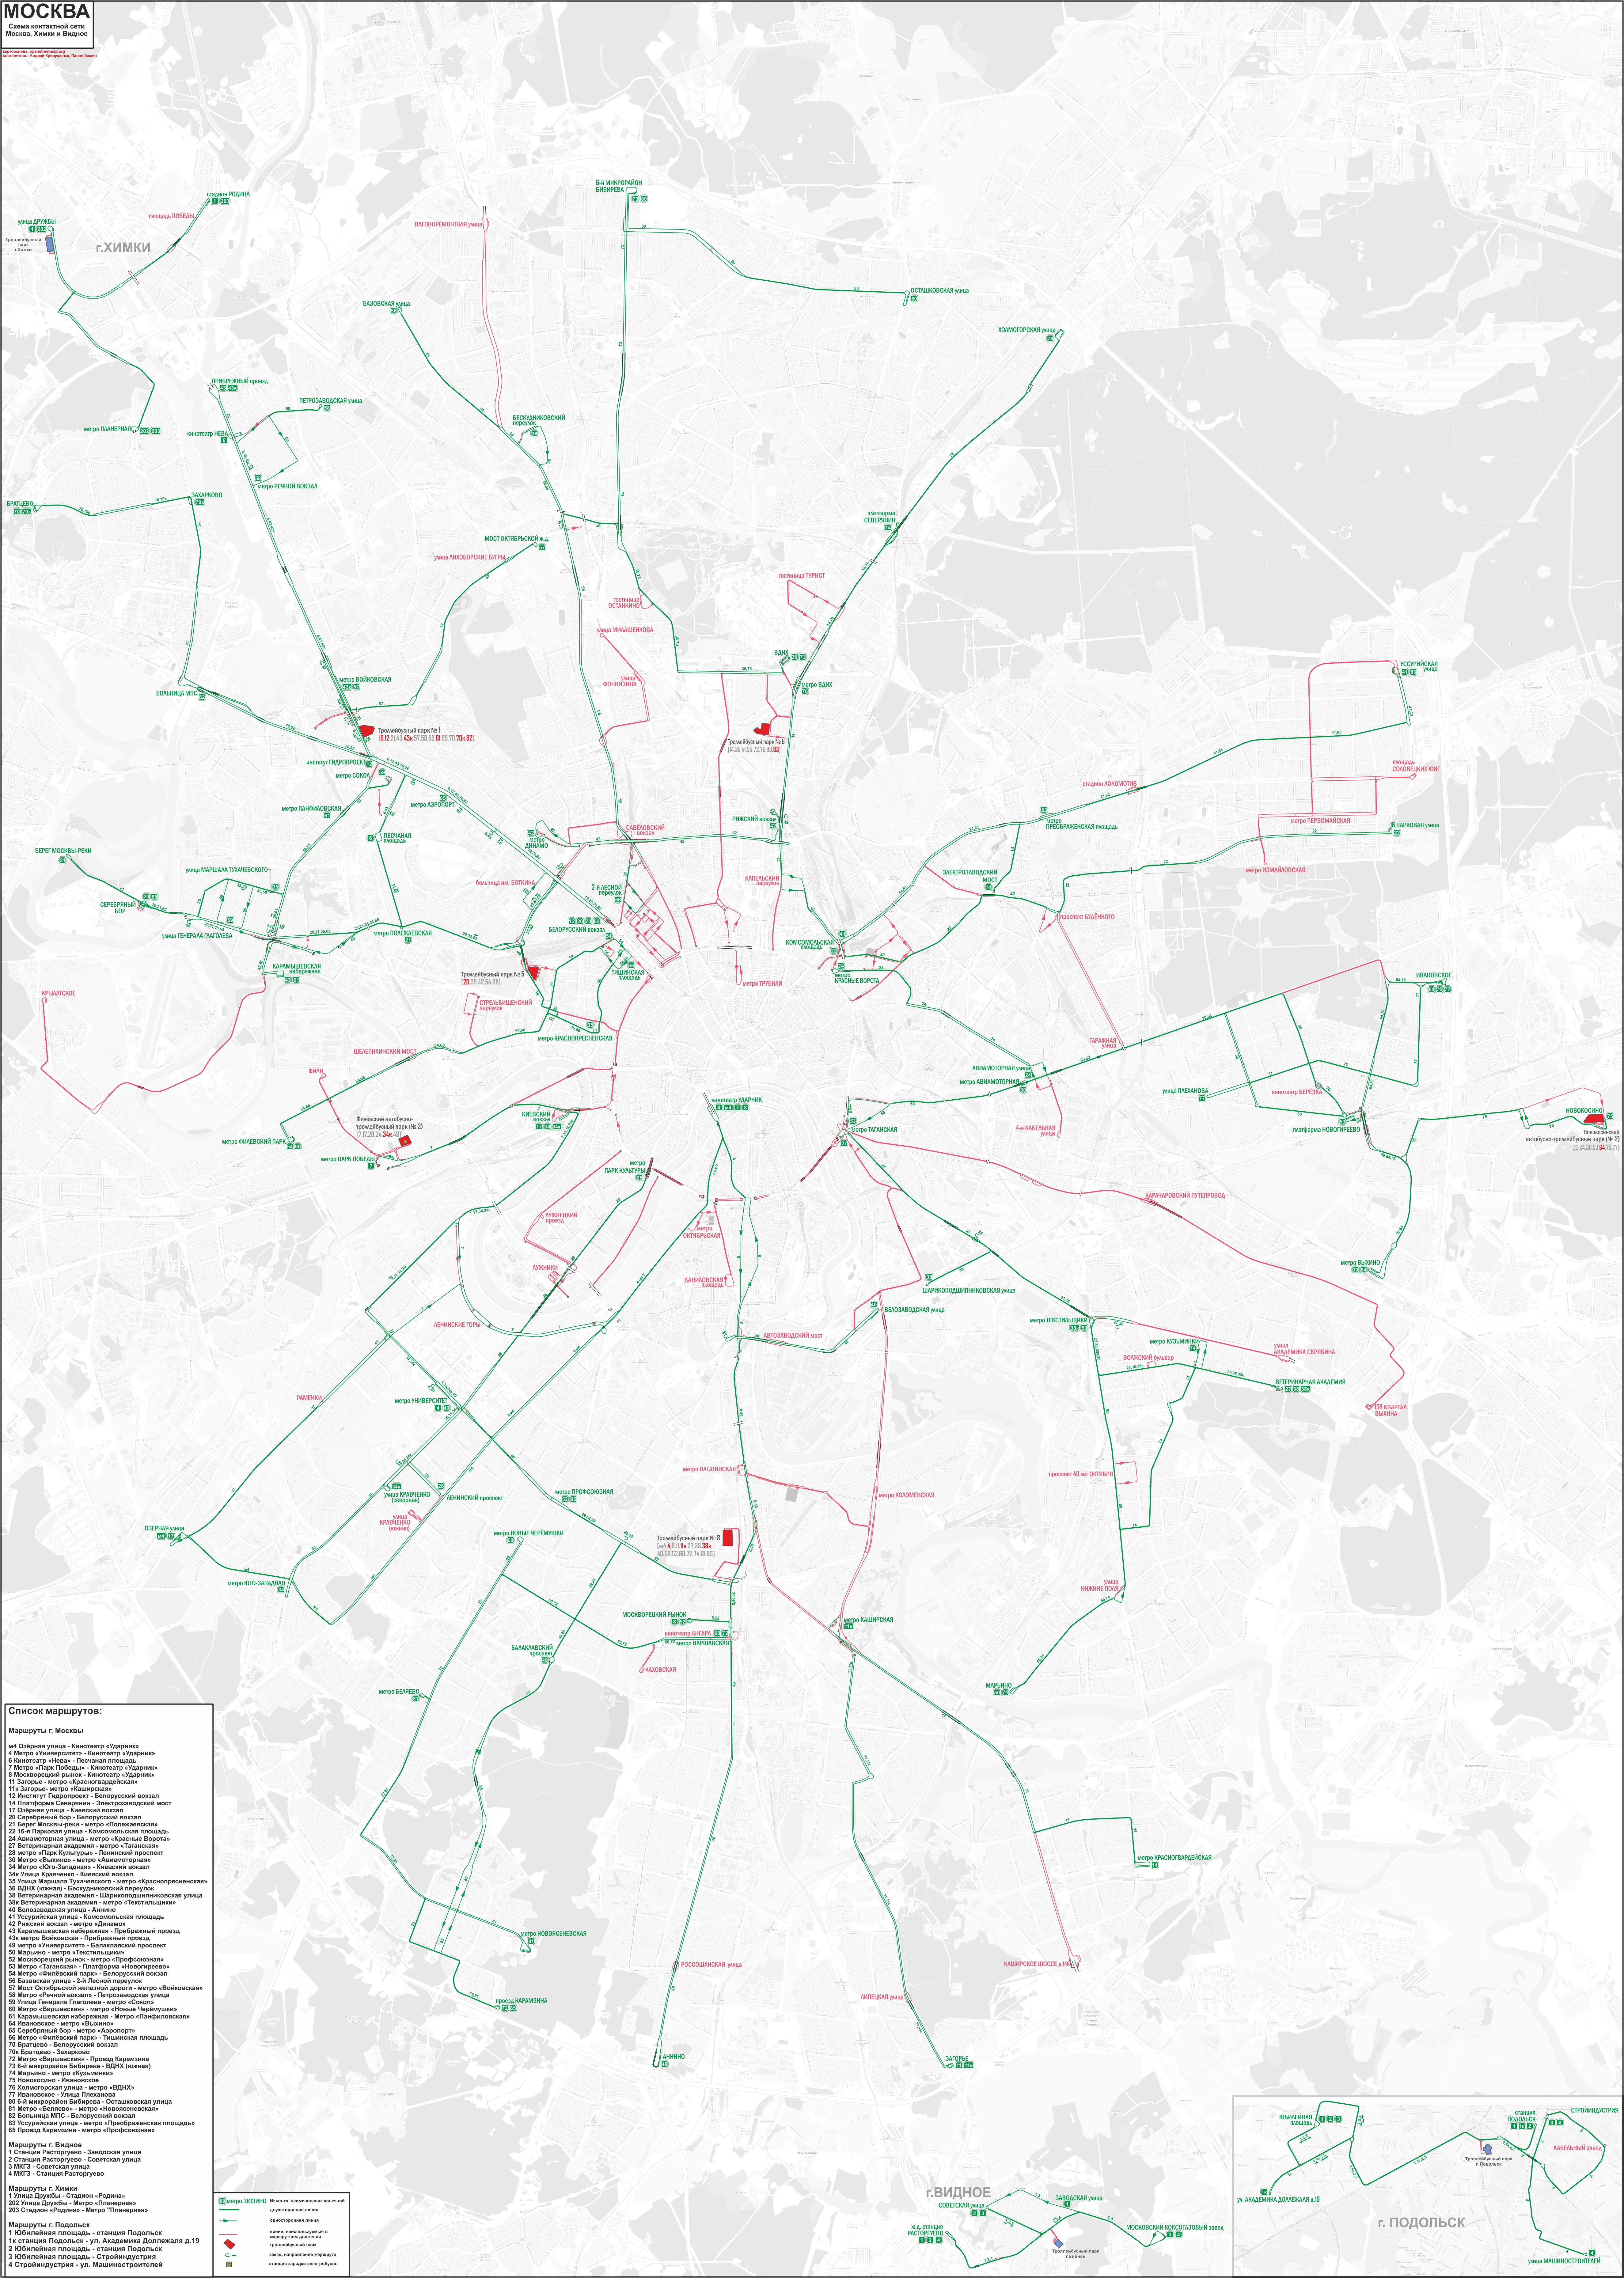 Moscow — Citywide Maps; Khimki — Maps; Vidnoye — Maps; Podolsk — Maps; Moscow — Tramway and Trolleybus Infrastructure Maps